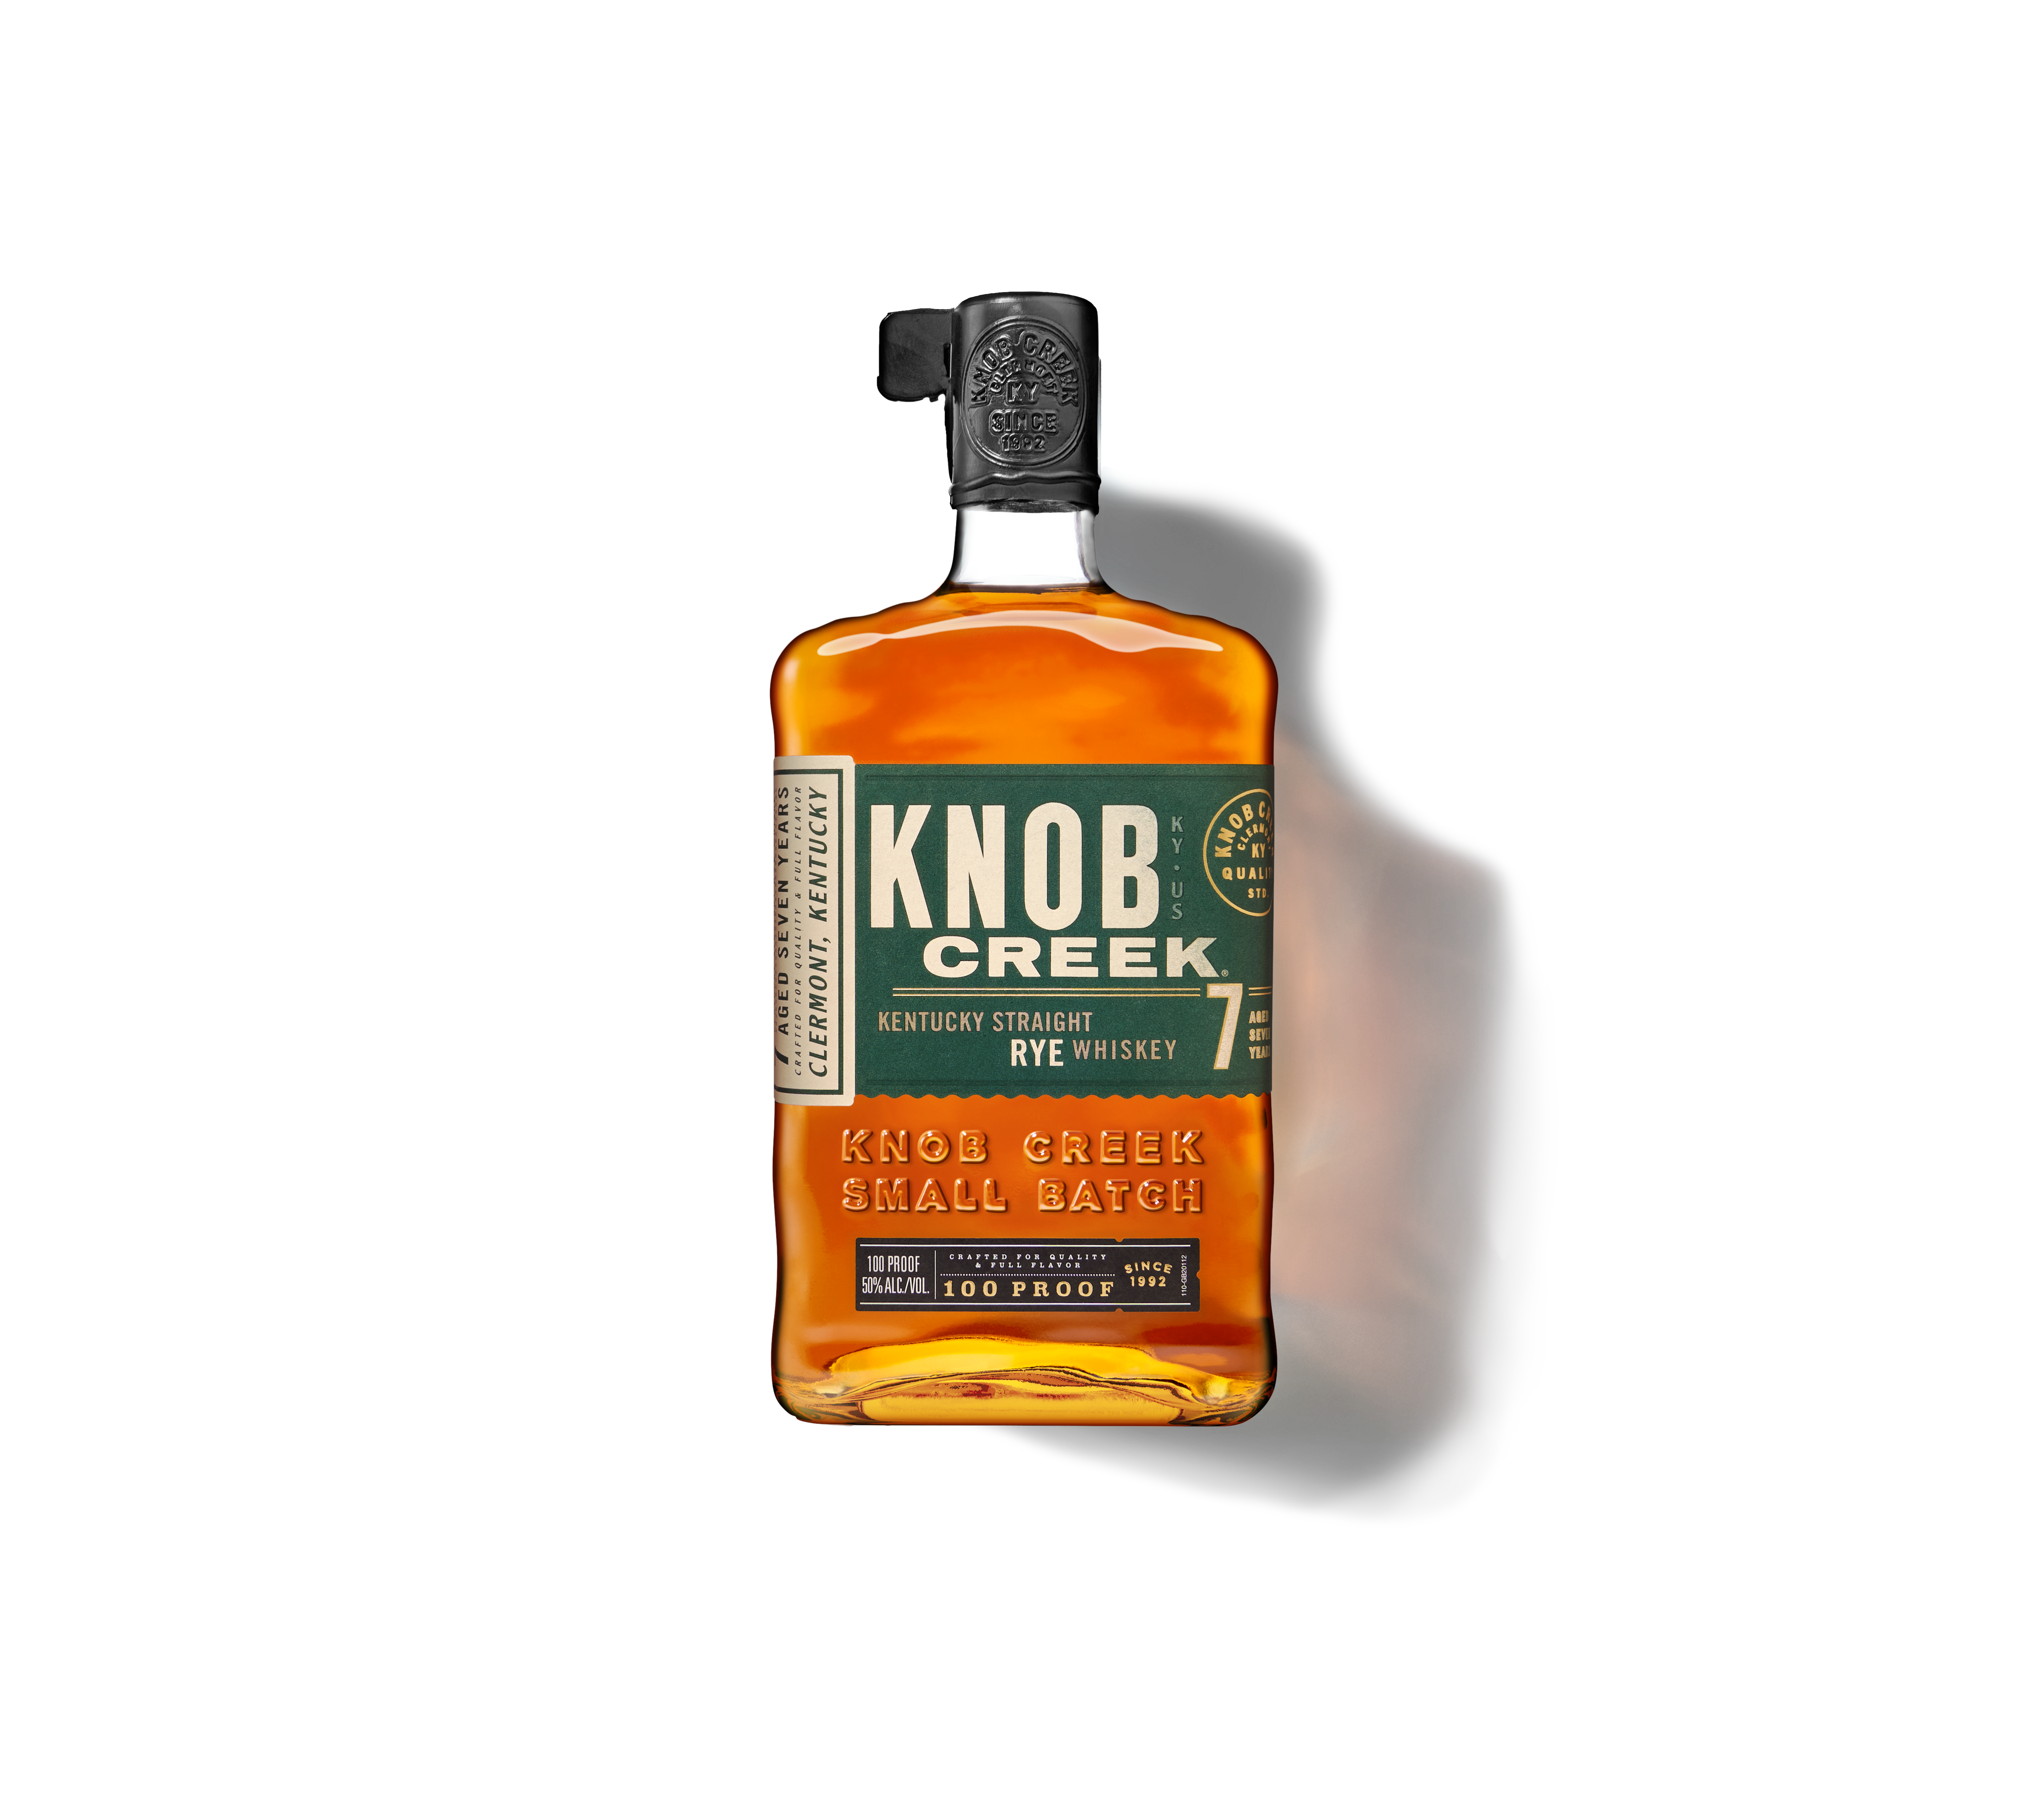 New: Knob Creek 7 Years Old Straight Rye Whiskey Given Official Age Statement